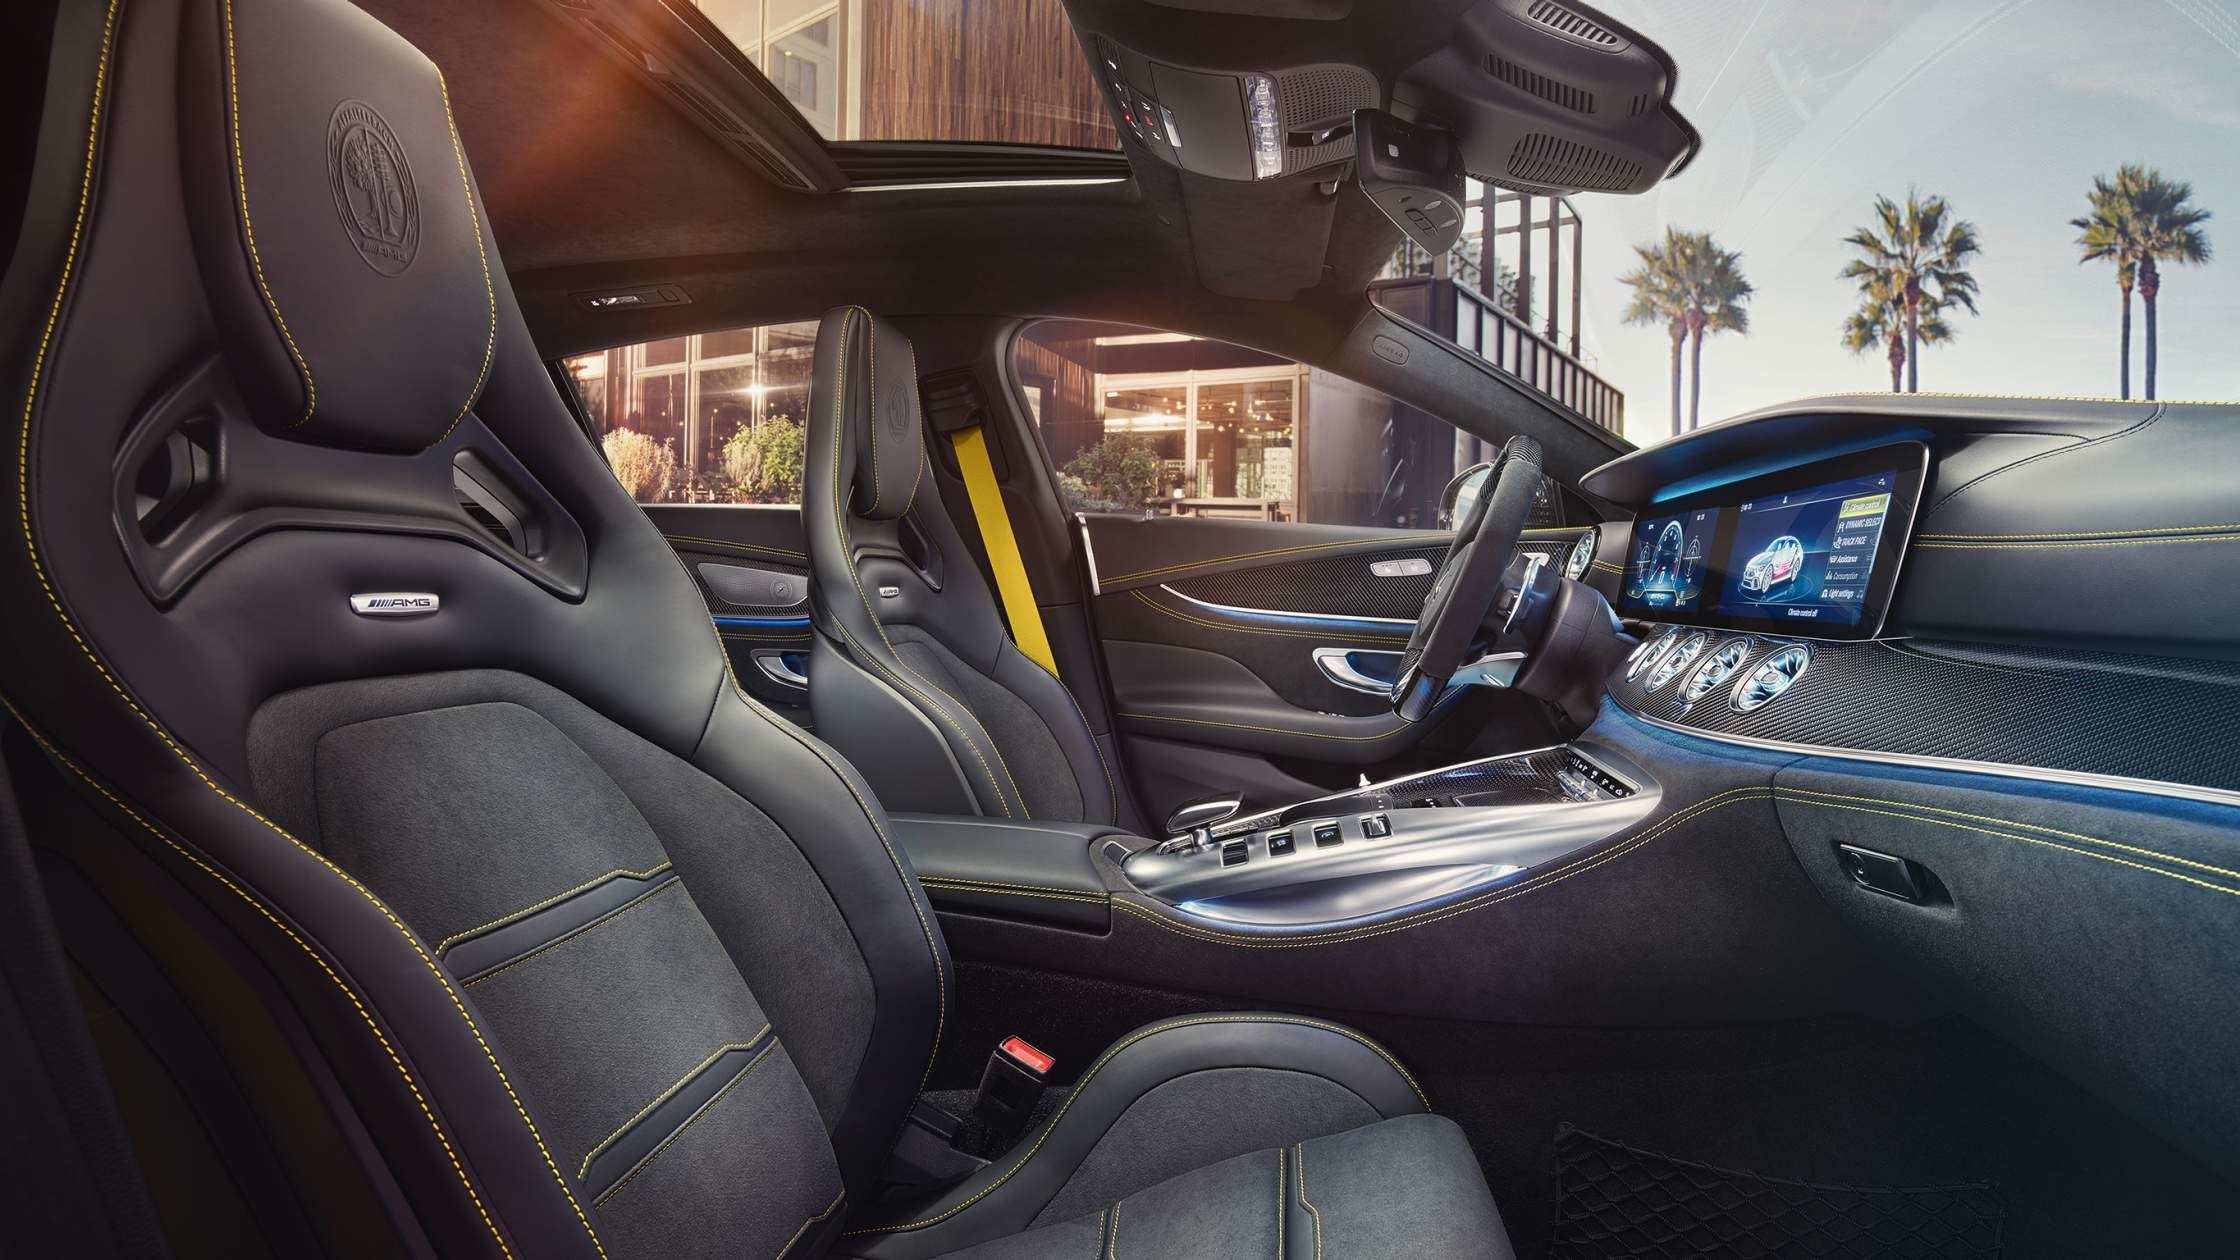 The cabin of the Mercedes-AMG GT63.